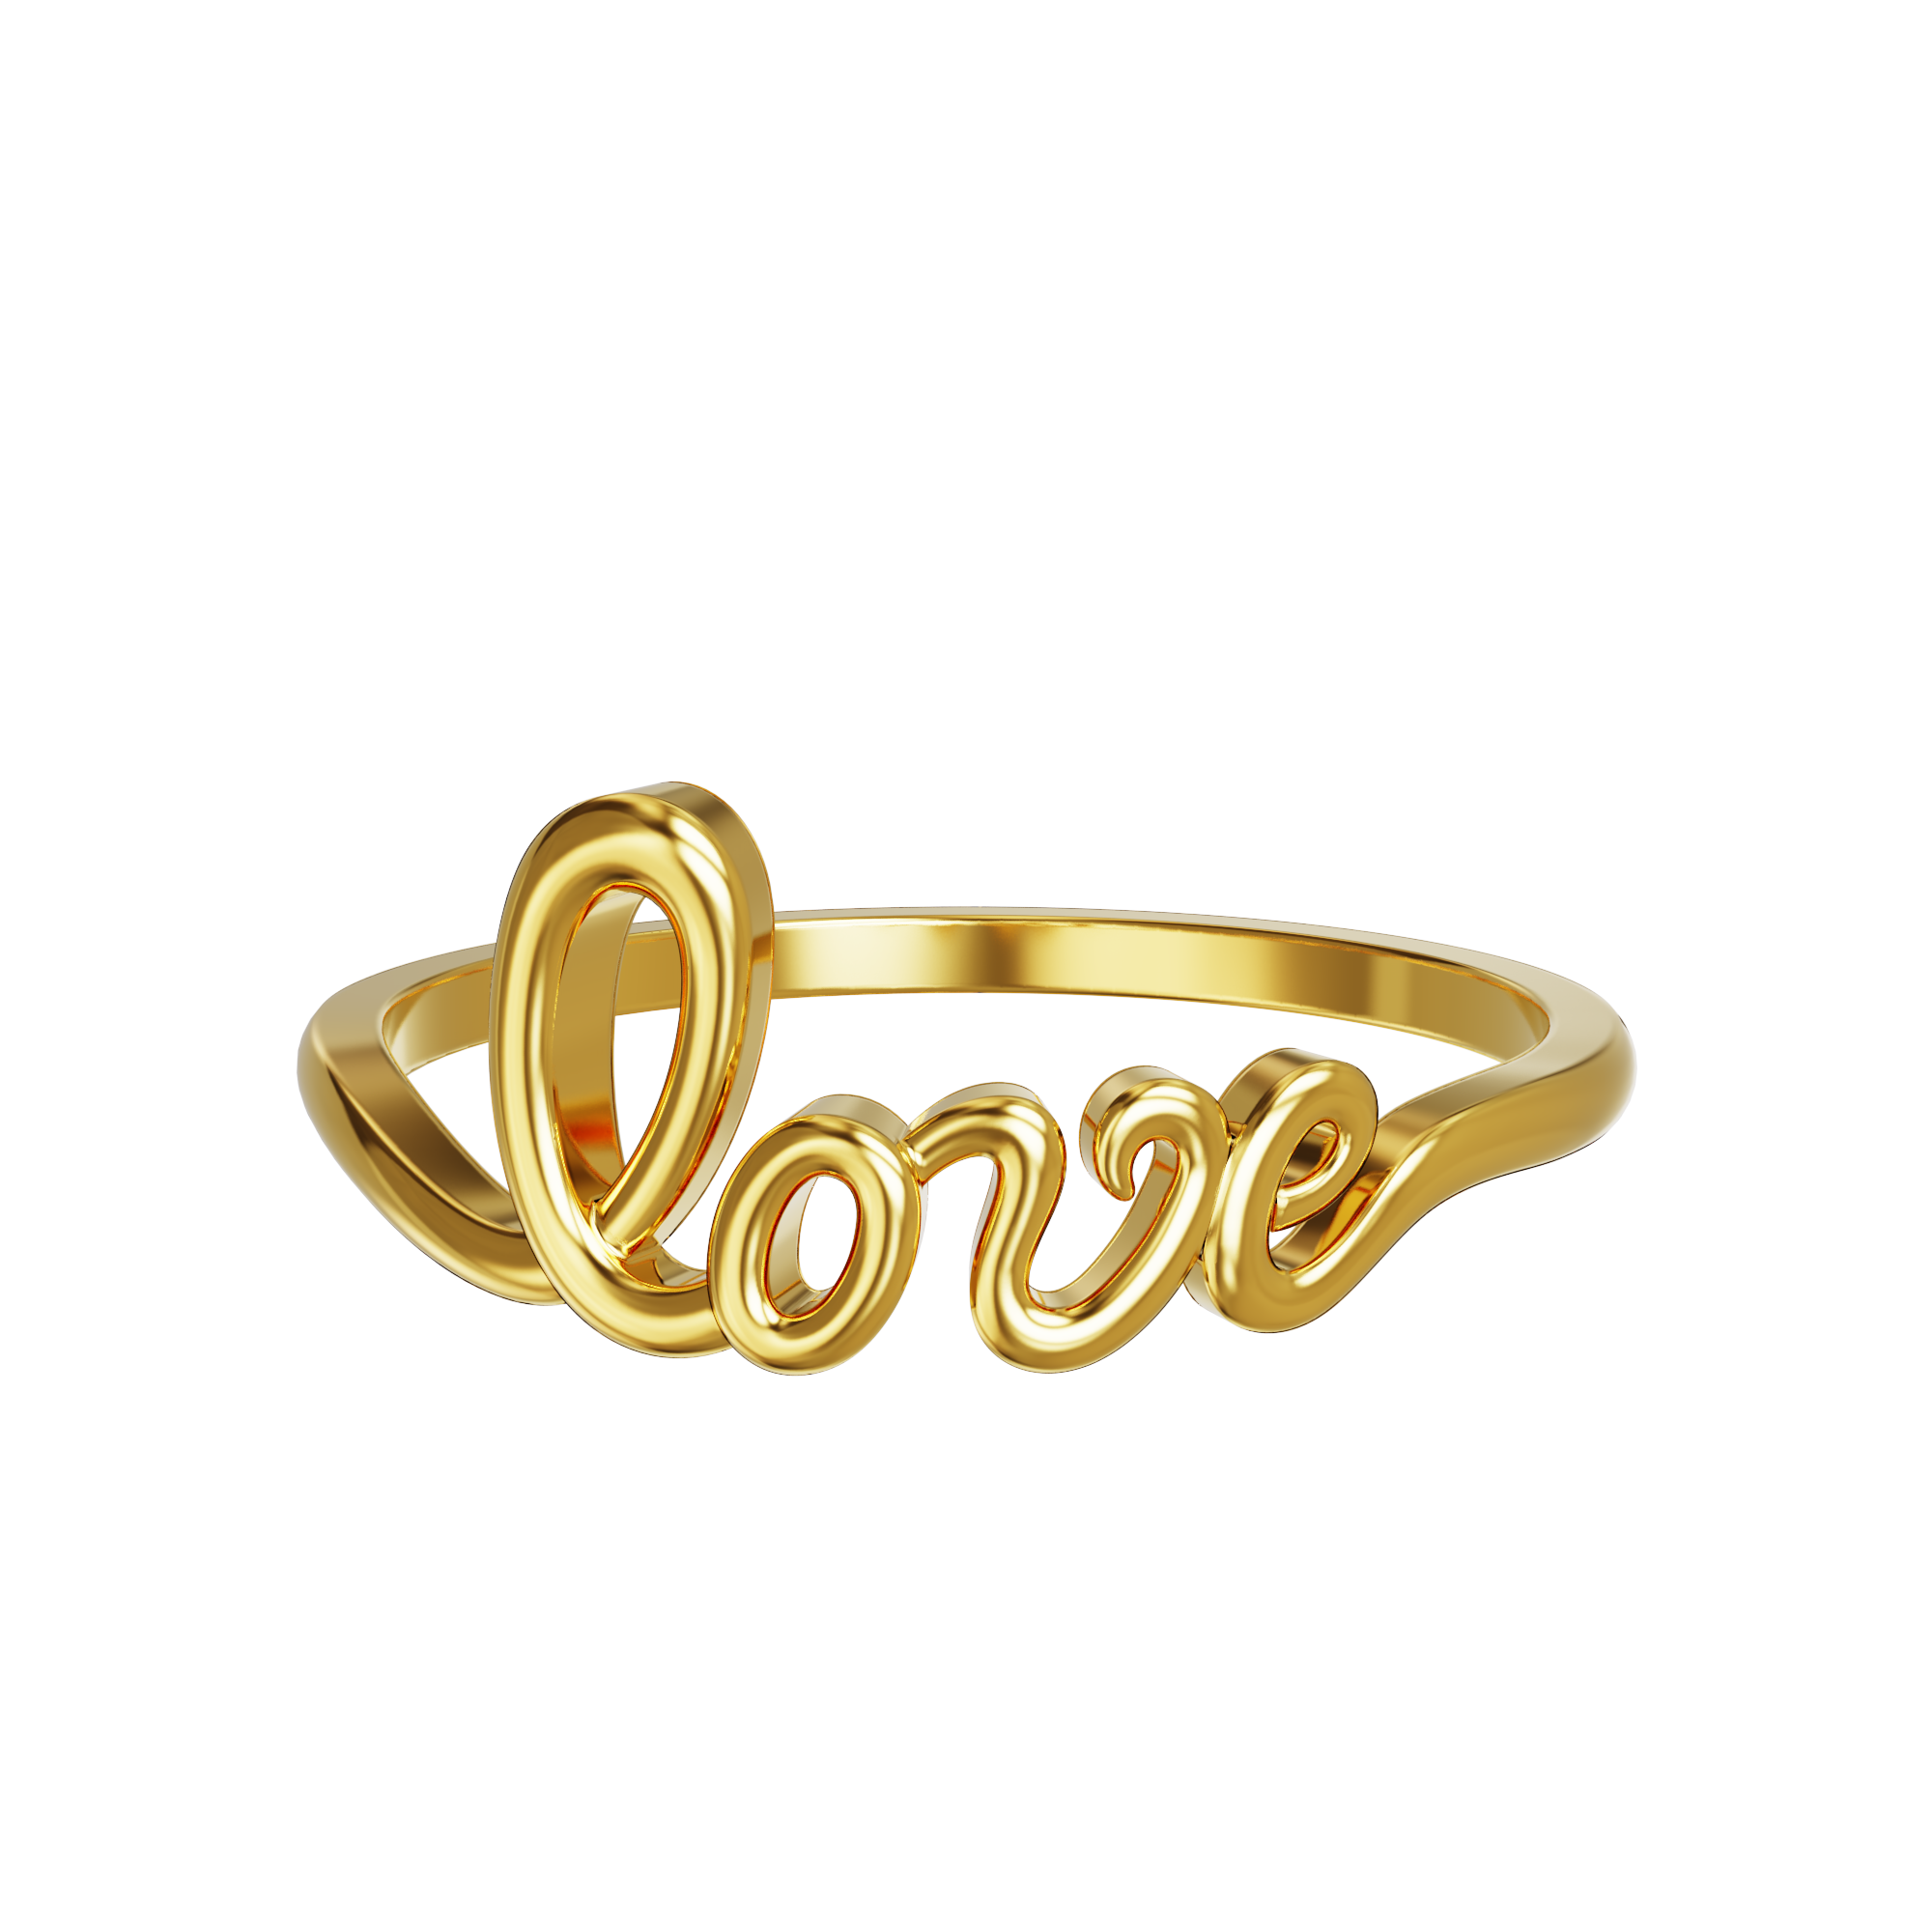 LATS Gold Color Hollowed-out Heart Shape Open Ring Design Cute Fashion Love  Jewelry for Women Girl Child Gifts Adjustable